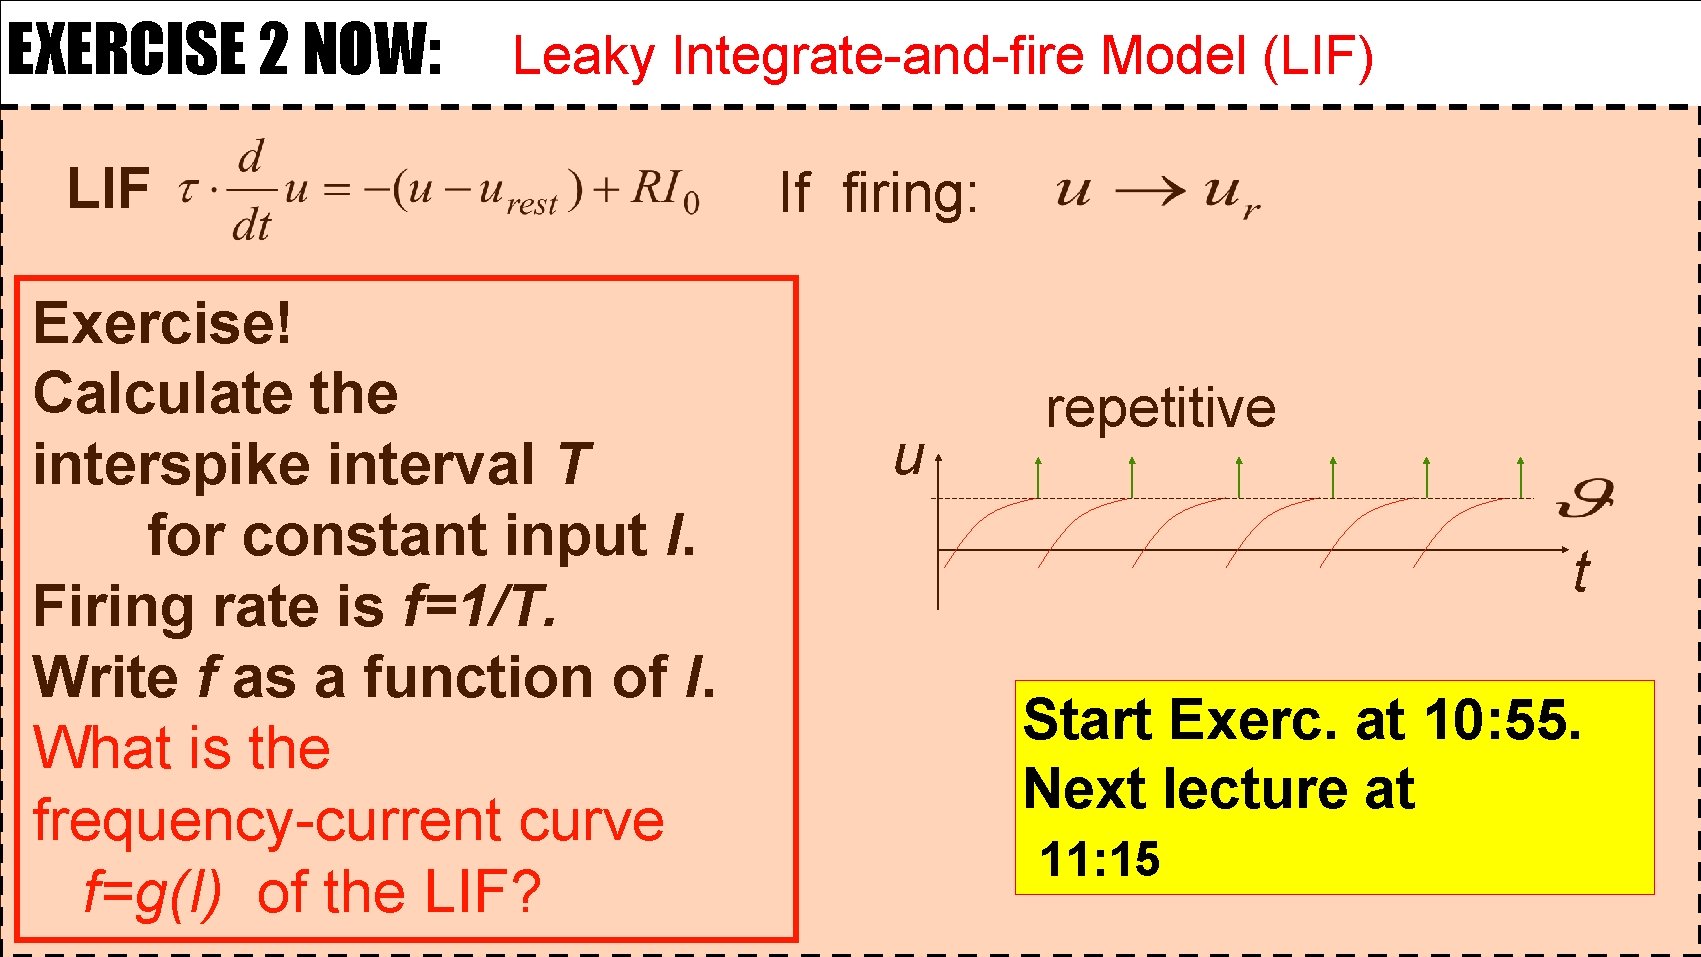 EXERCISE 2 NOW: Leaky Integrate-and-fire Model (LIF) LIF Exercise! Calculate the interspike interval T